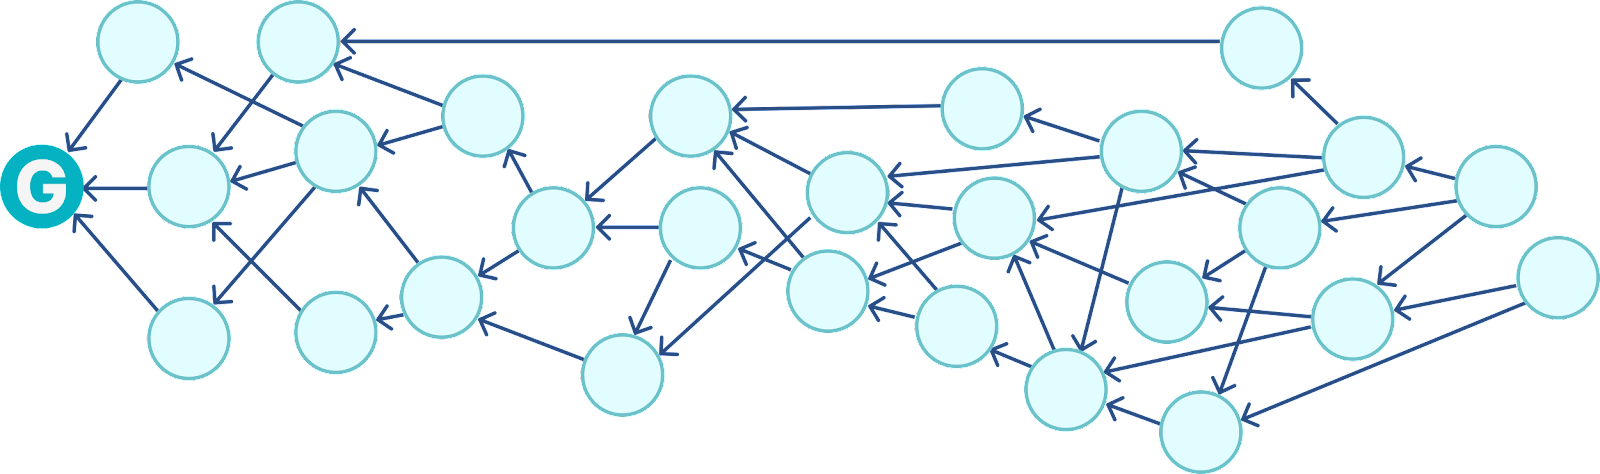 directed acyclic graph